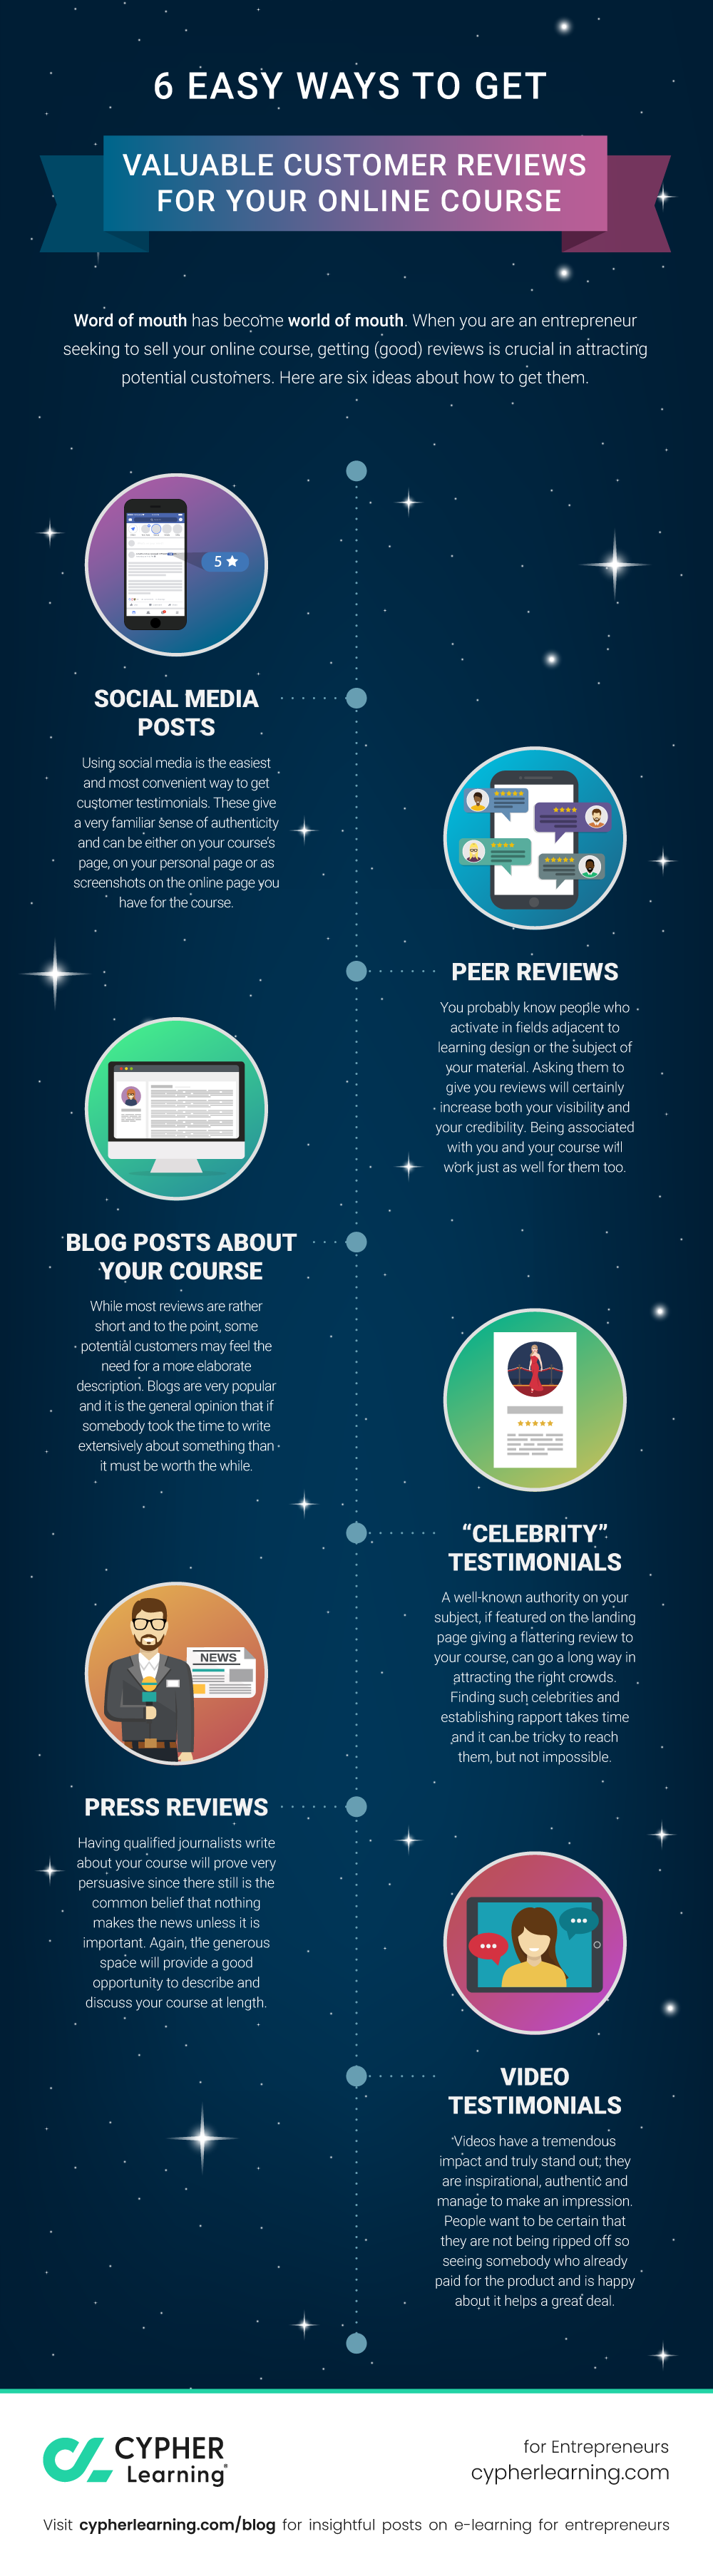 6 Easy ways to get valuable customer reviews for your online course